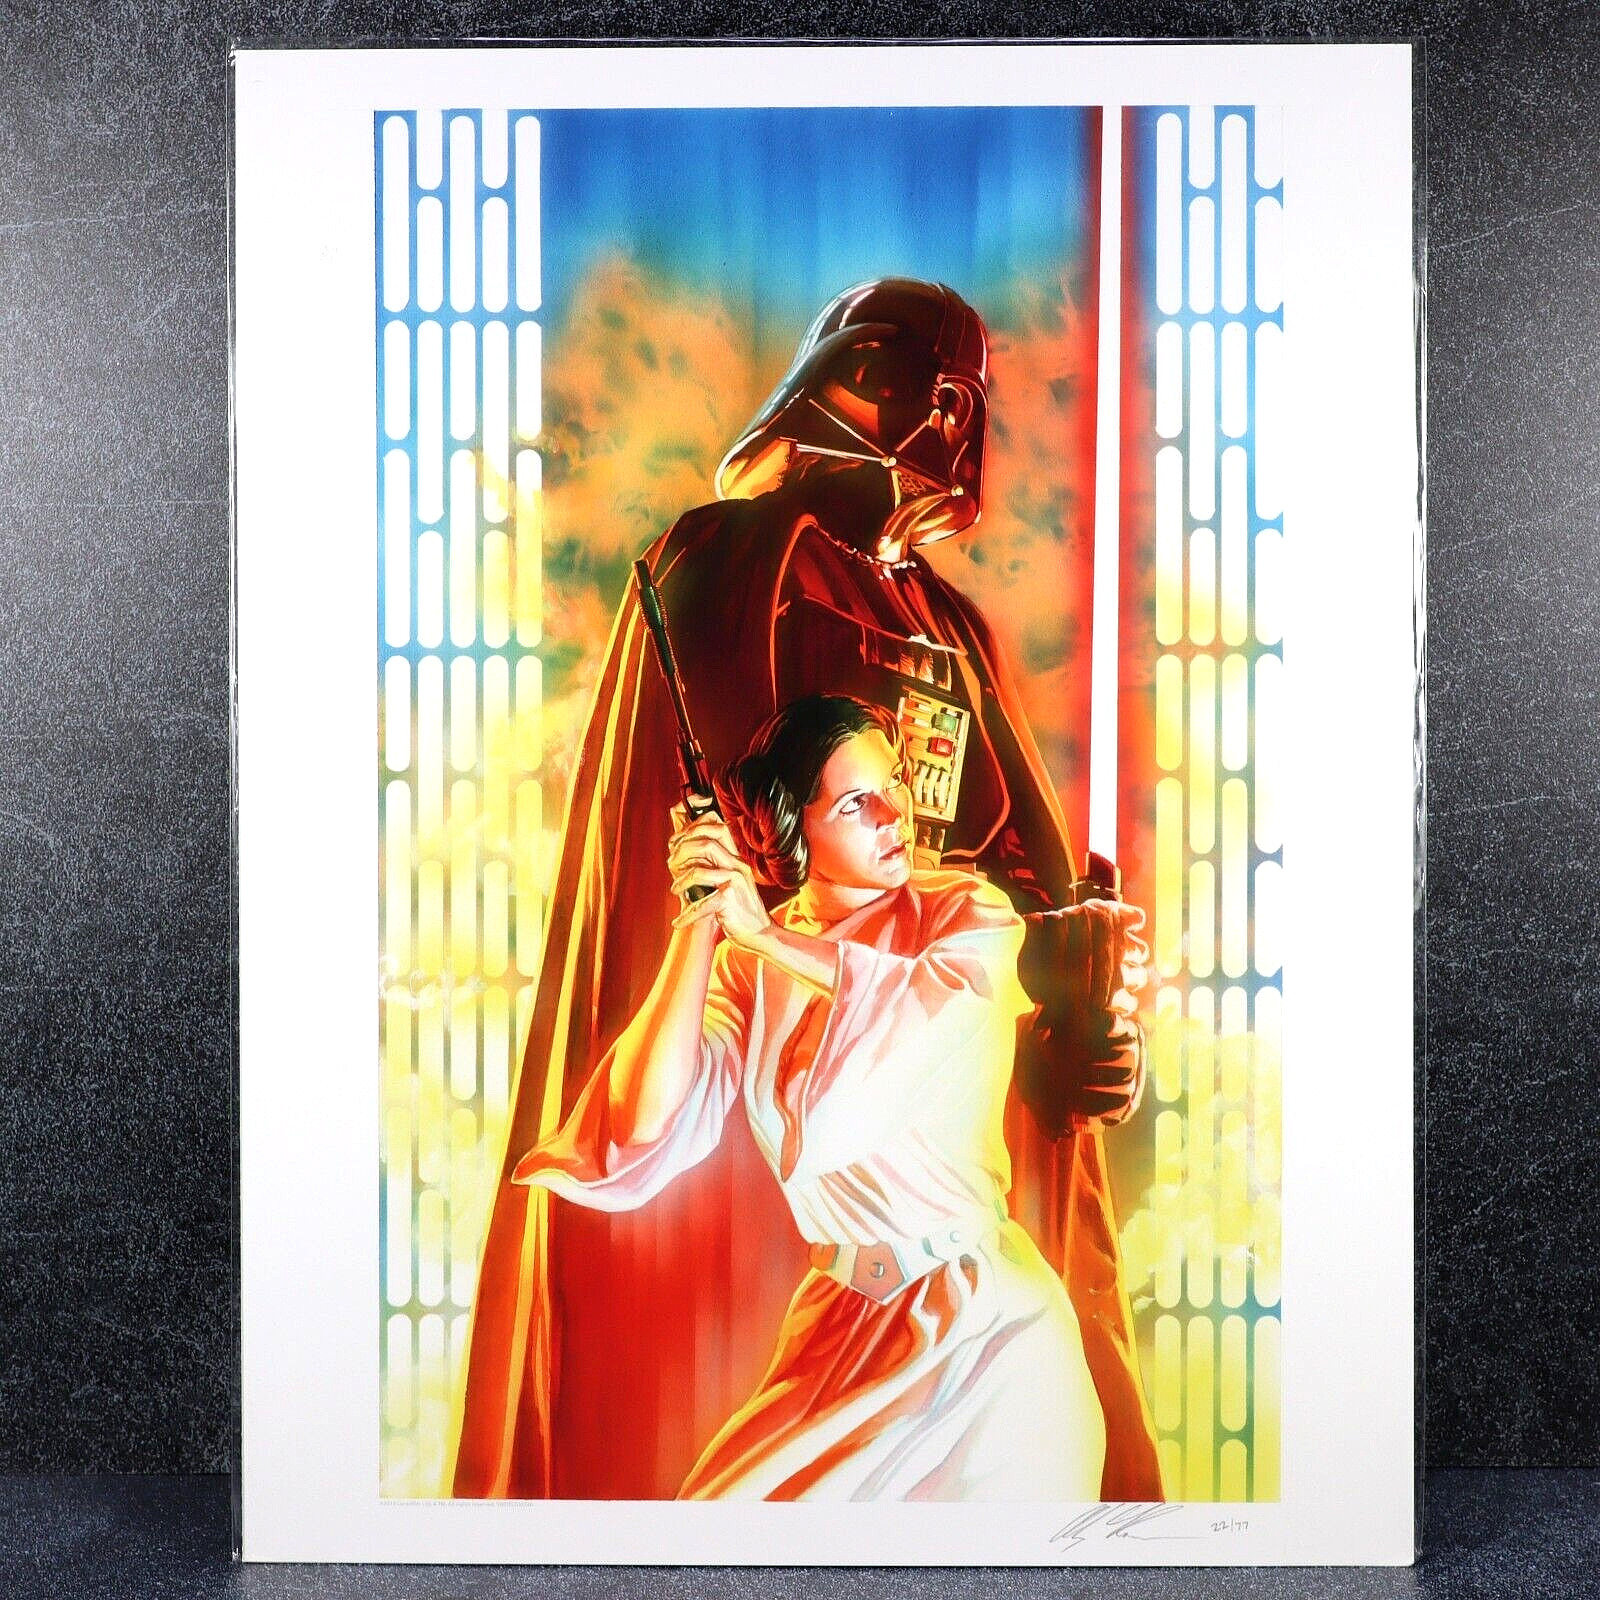 Star Wars #4 Alex Ross Art Hand Signed LE 22/77 Acme Archives Giclee 2013 Sealed